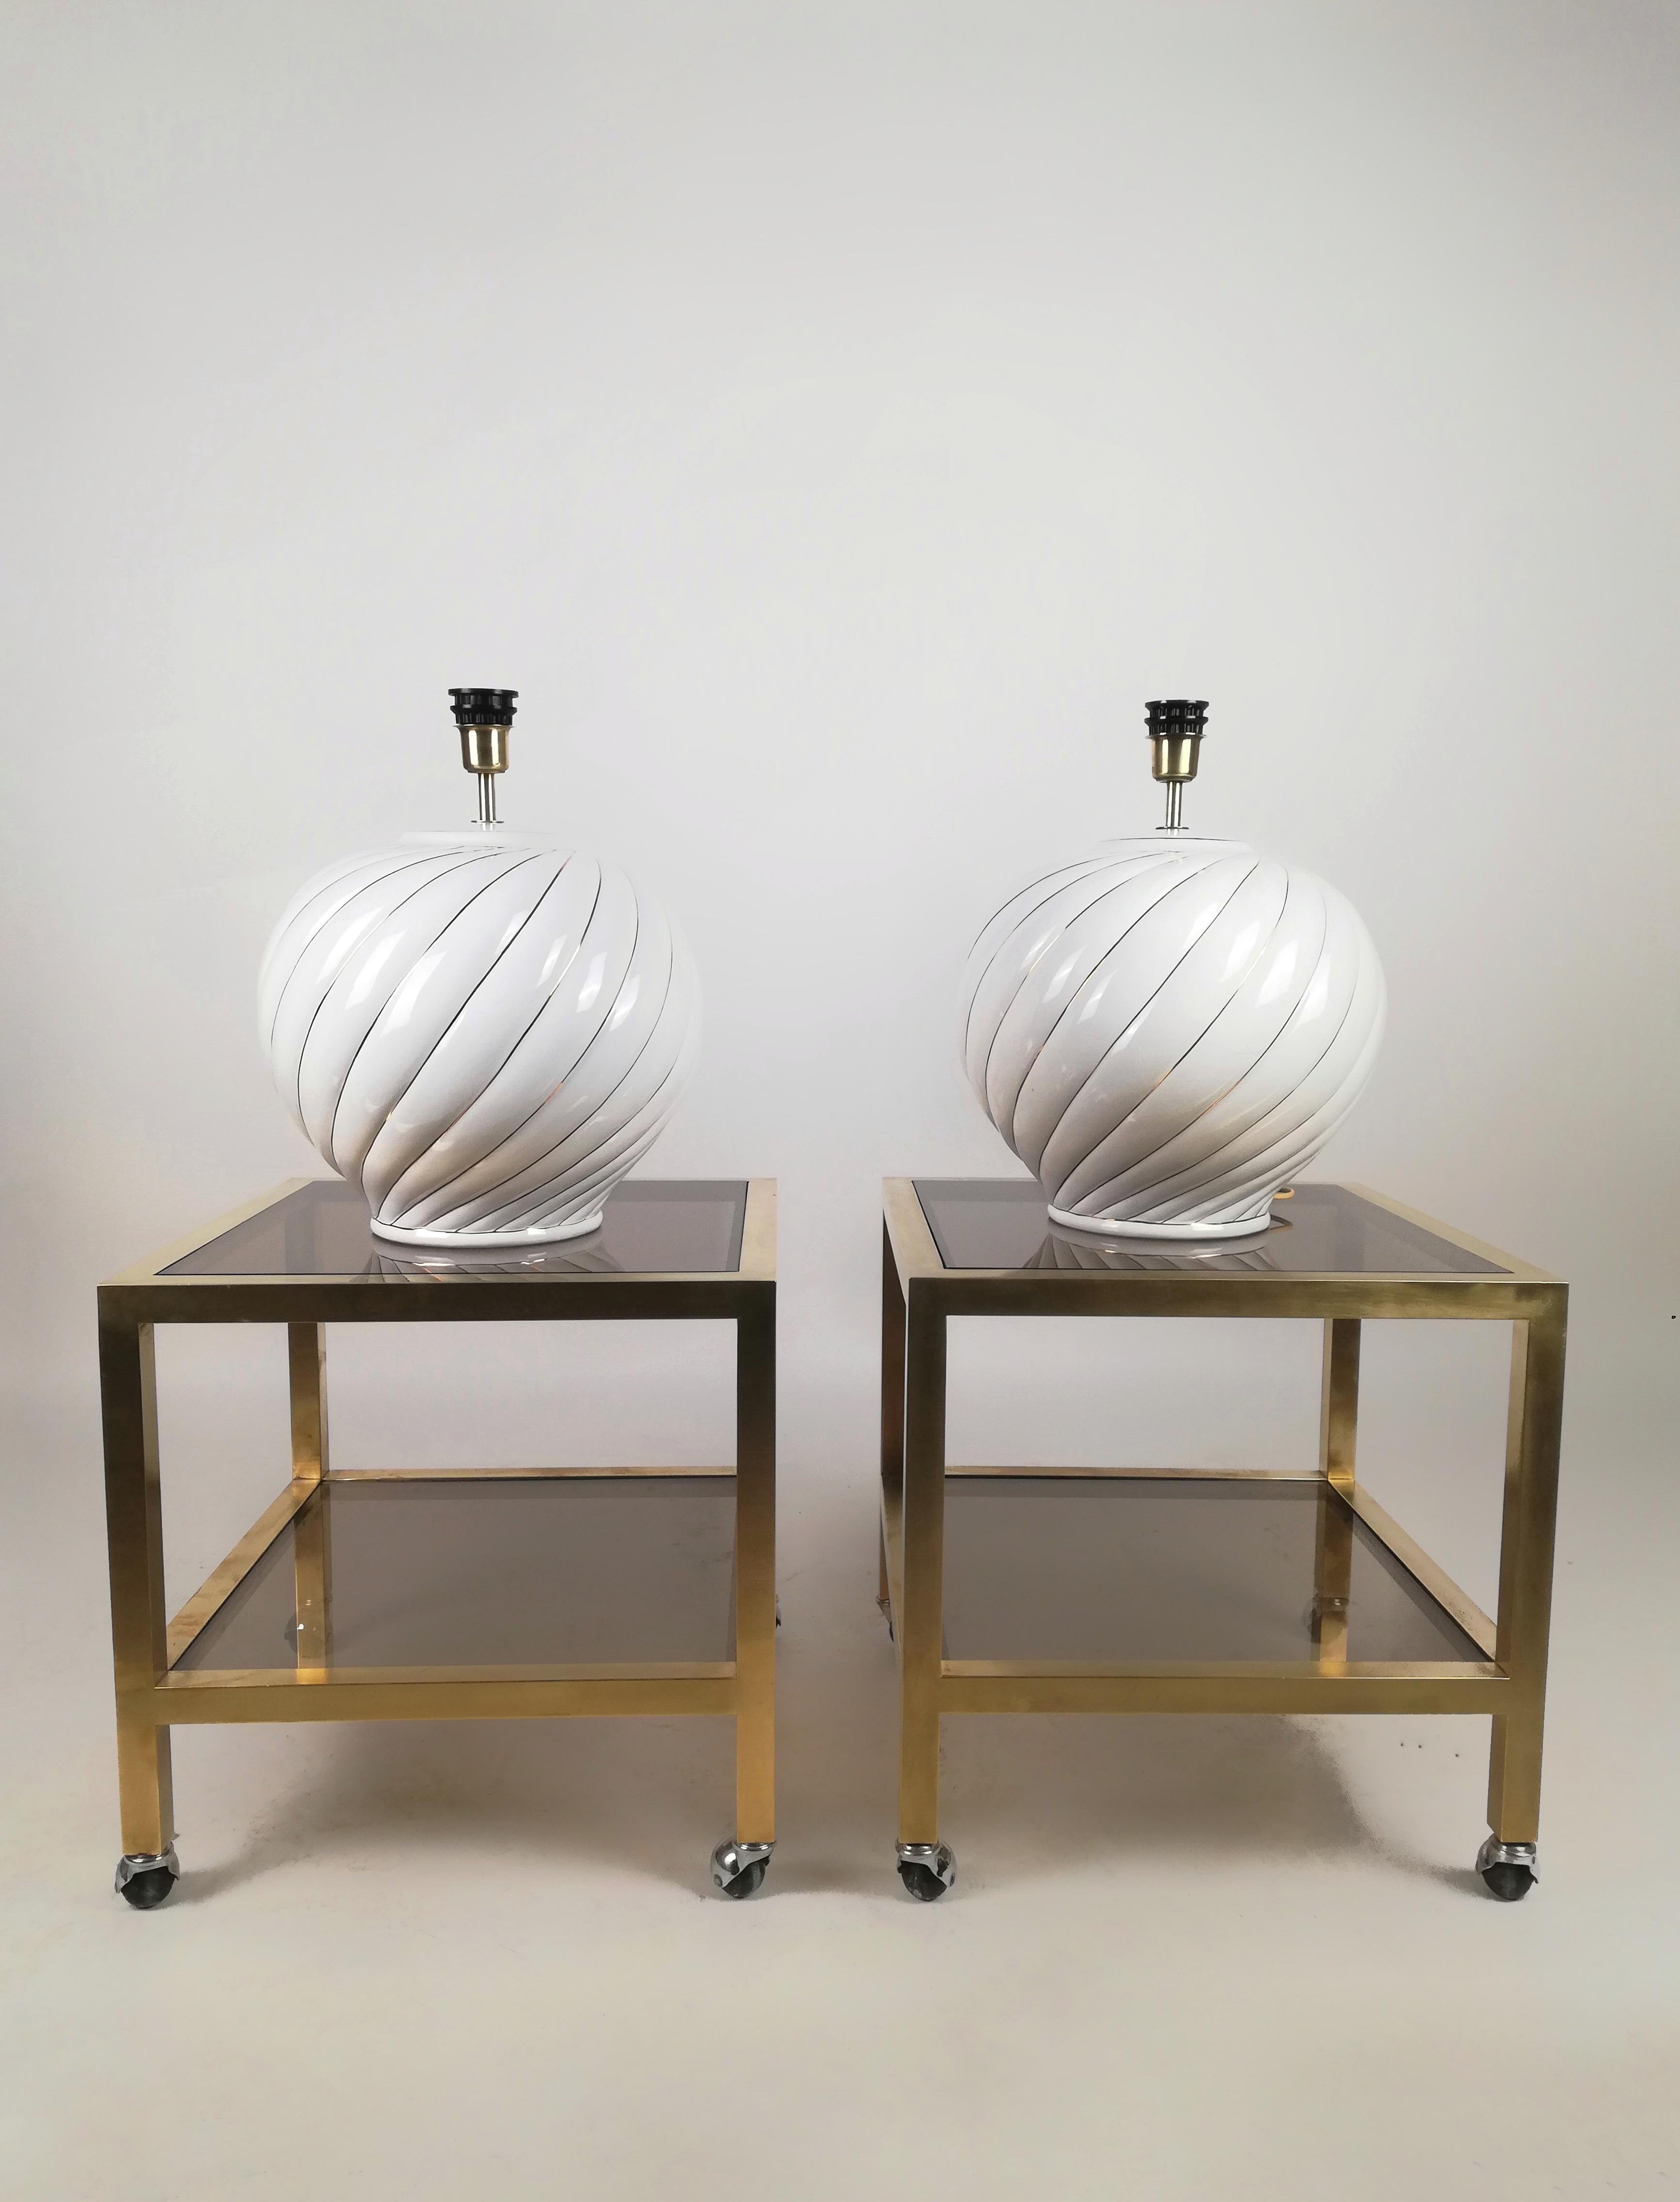 A Pair of 1970s lamps by Tommaso Barbi.
They were made in Italy in white glazed ceramic with gold details.
The 38cm diameter structure has a rounded and ribbed shape highlighted by gold brushstrokes.
The manufacturer's mark is visibile at the